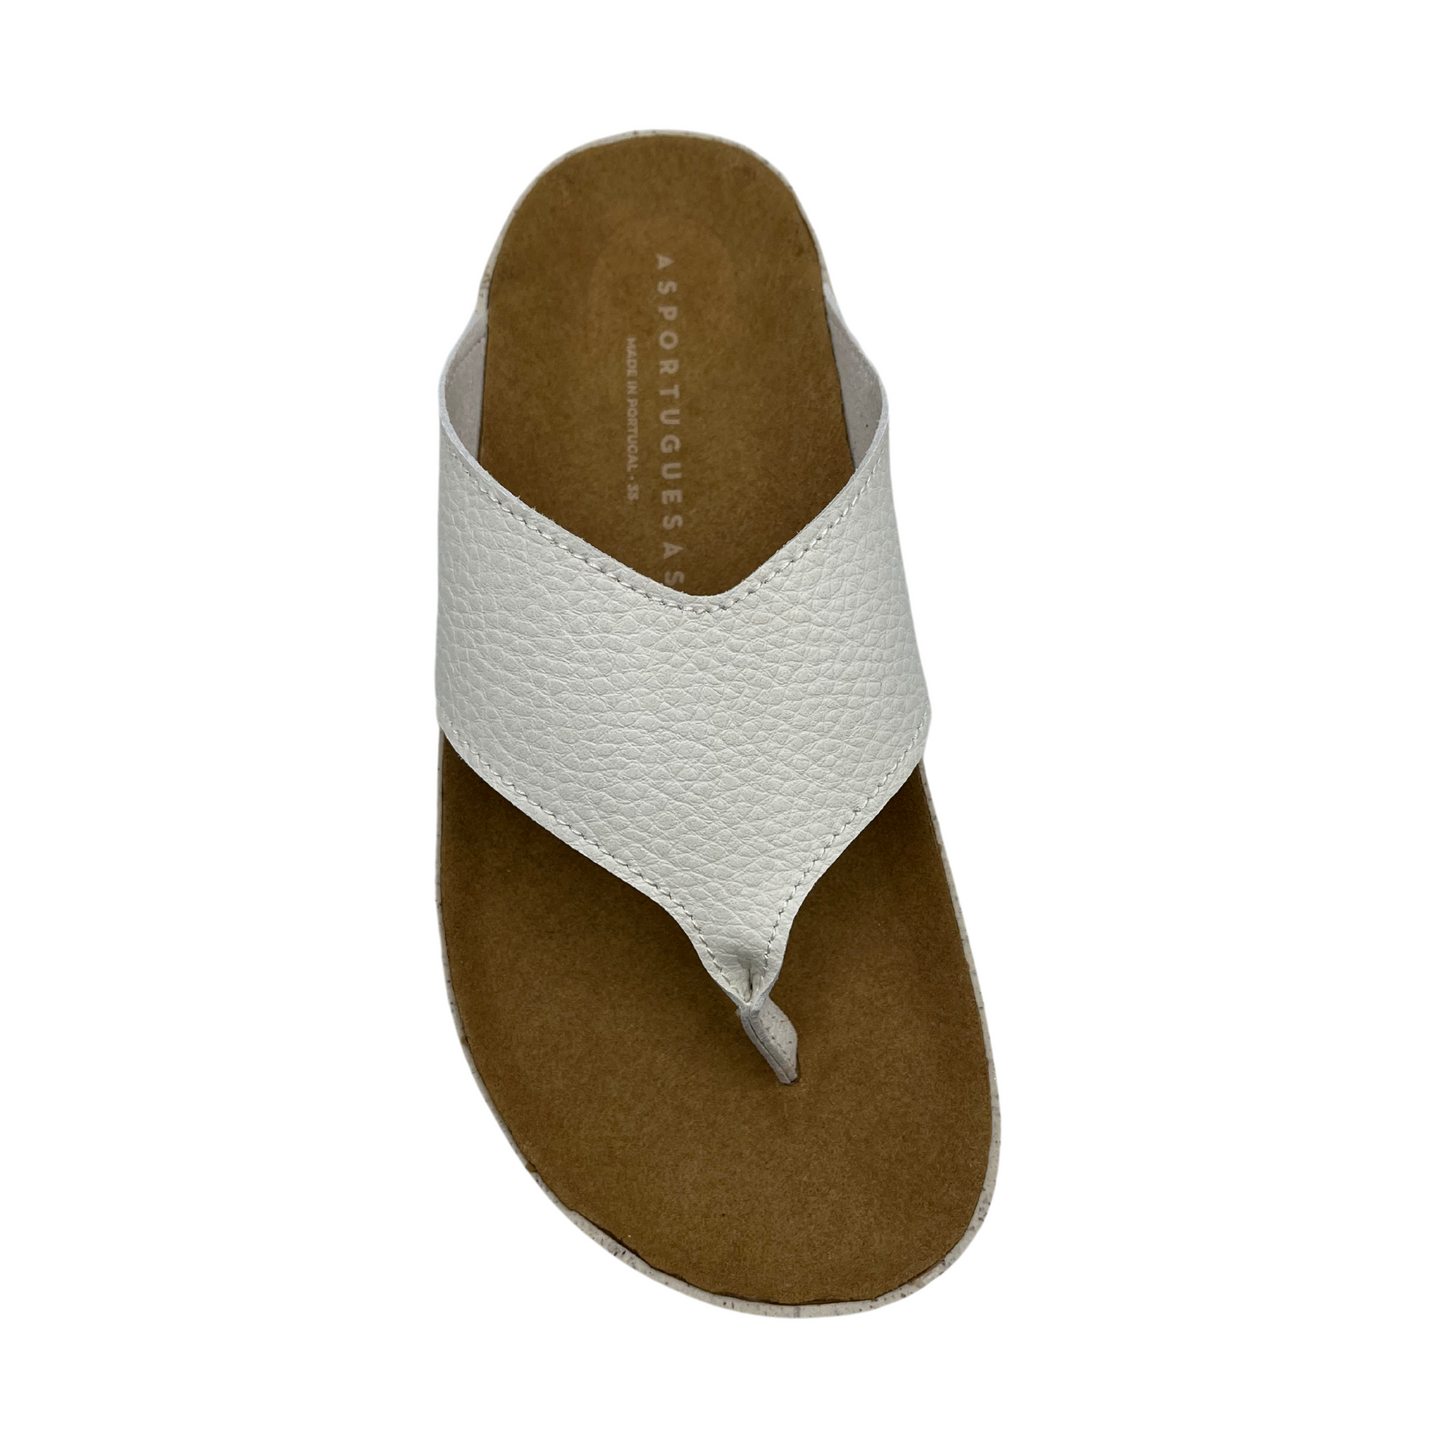 Top view of white strapped thong sandal with brown contoured footbed and white speckled outsole